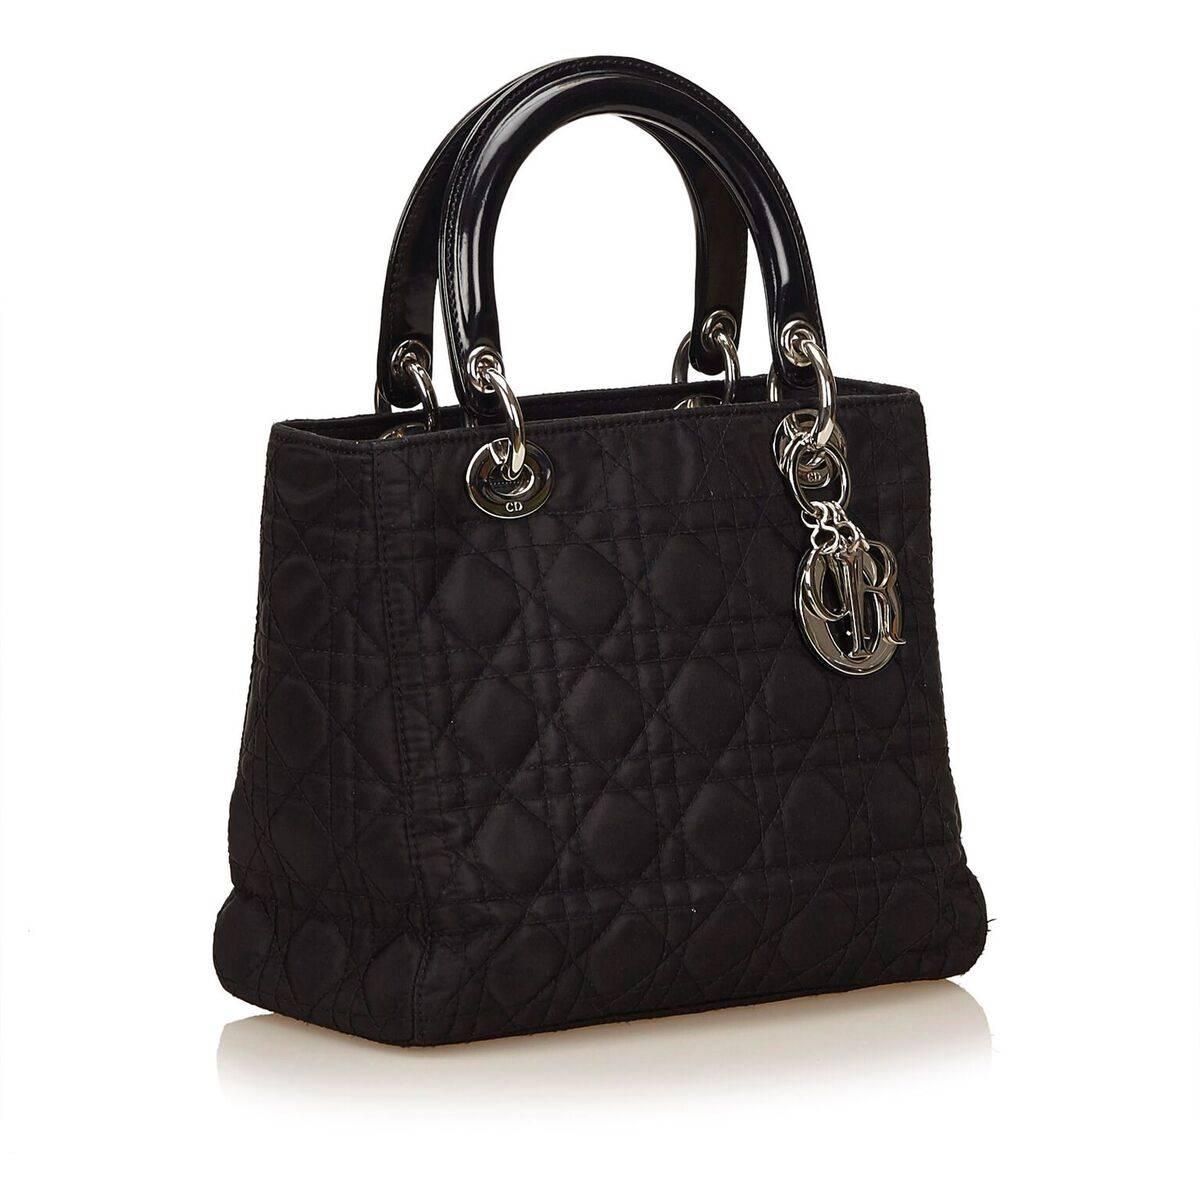 Product details:  Black quilted nylon Lady satchel by Christian Dior.  Dual carry handles.  Detachable shoulder strap.  Top zip closure.  Lined interior with inner zip pocket.  Silvertone hardware.  Authenticity card included.  9